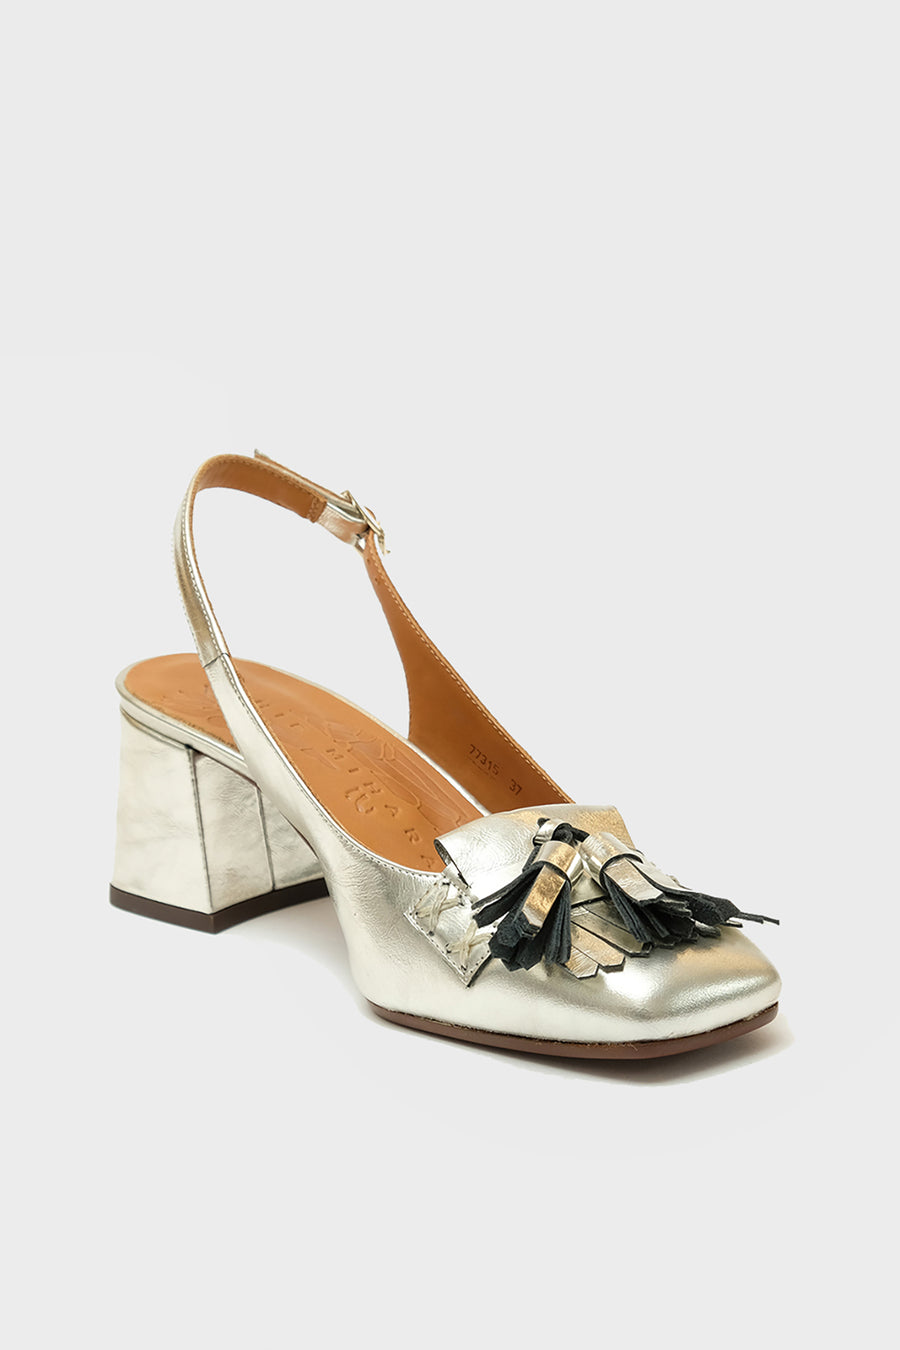 Slingback Chie Mihara in pelle color argento vouchi